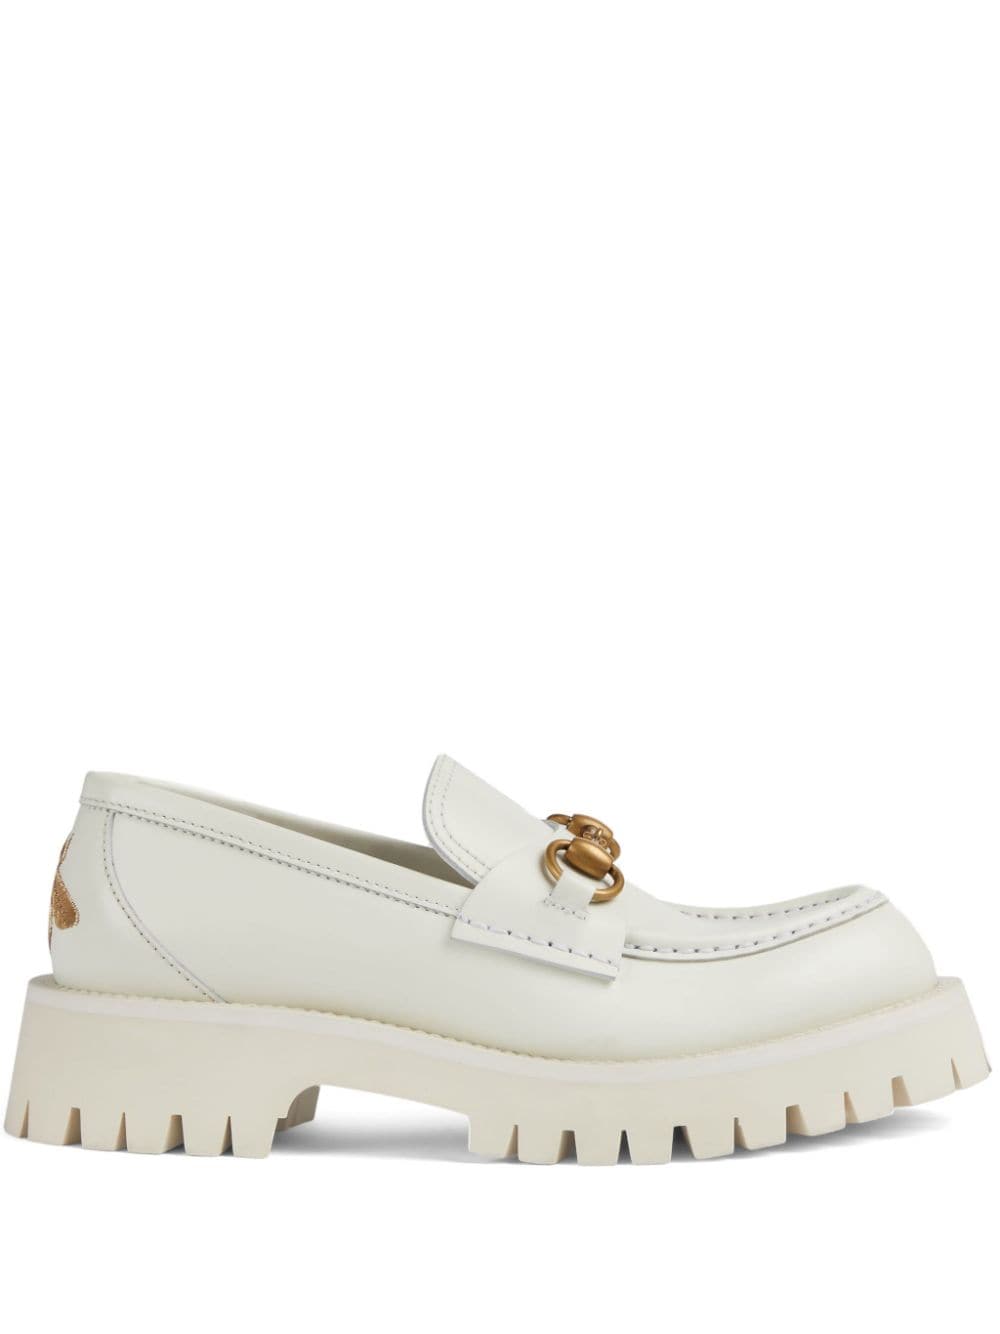 Gucci Horsebit-embellished Leather Loafers In White